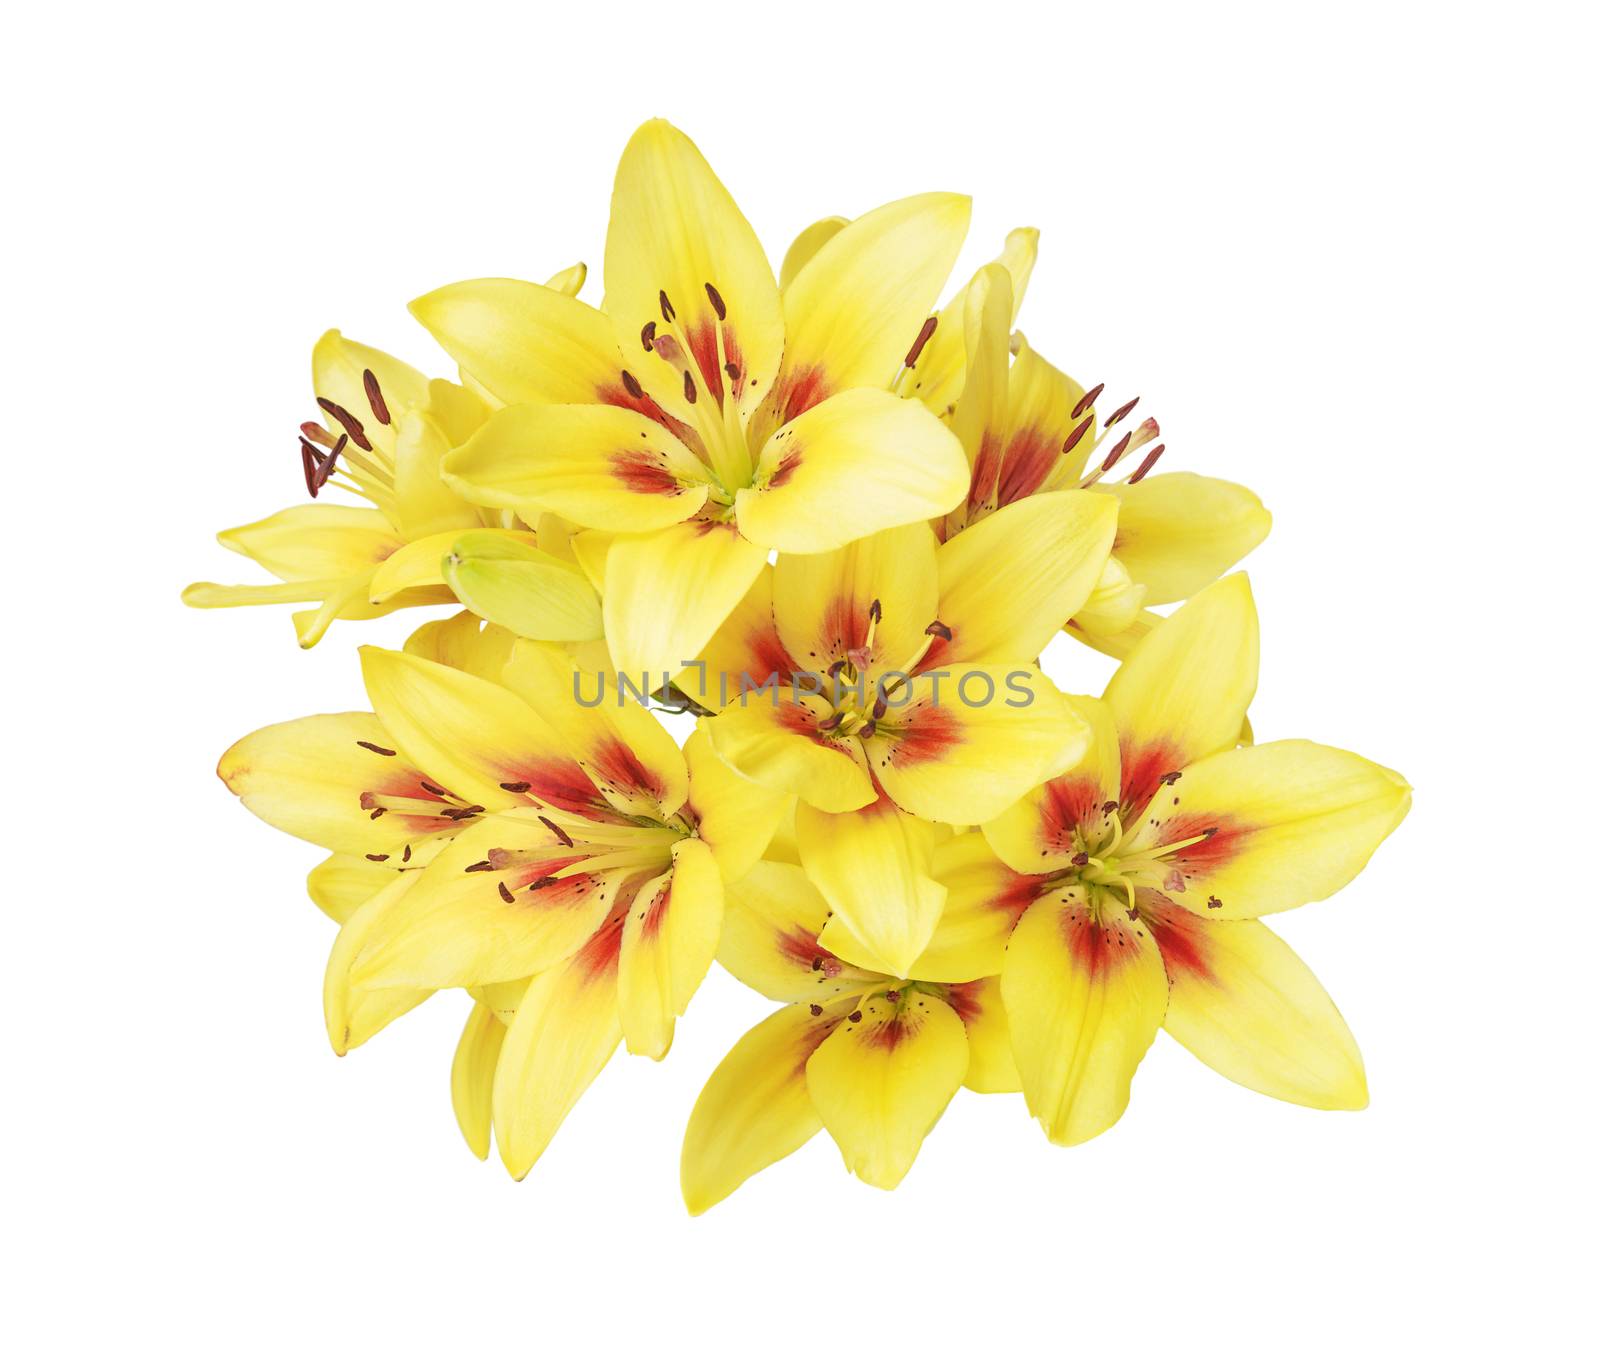 Bouquet of yellow lilies flowers isolated on a white background